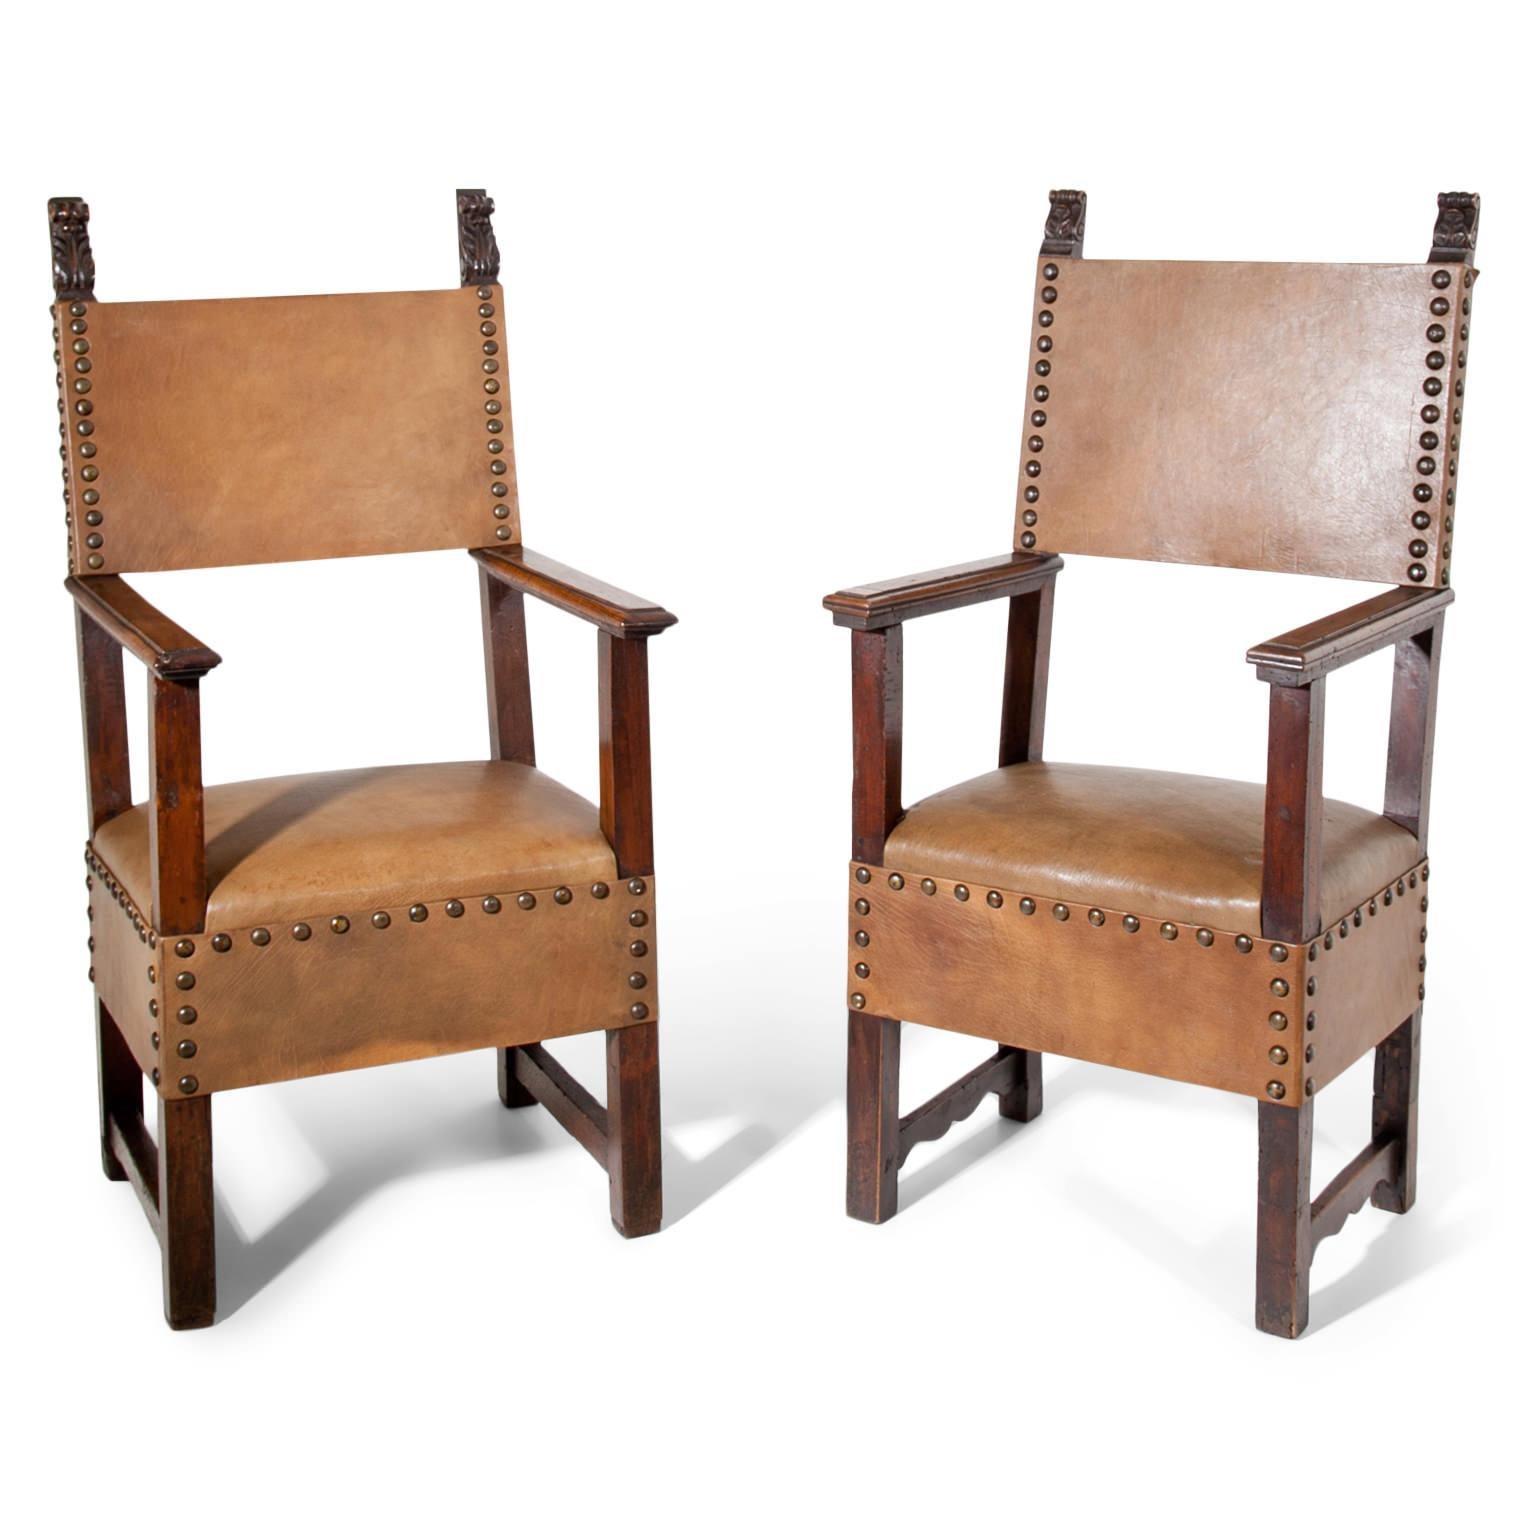 Renaissance armchair out of walnut, seat and backrest are covered with a brown leather and riveted. The chair stands on straight square legs that are connected on each side. The straight armrests slightly protrude over the elongated front legs. Very